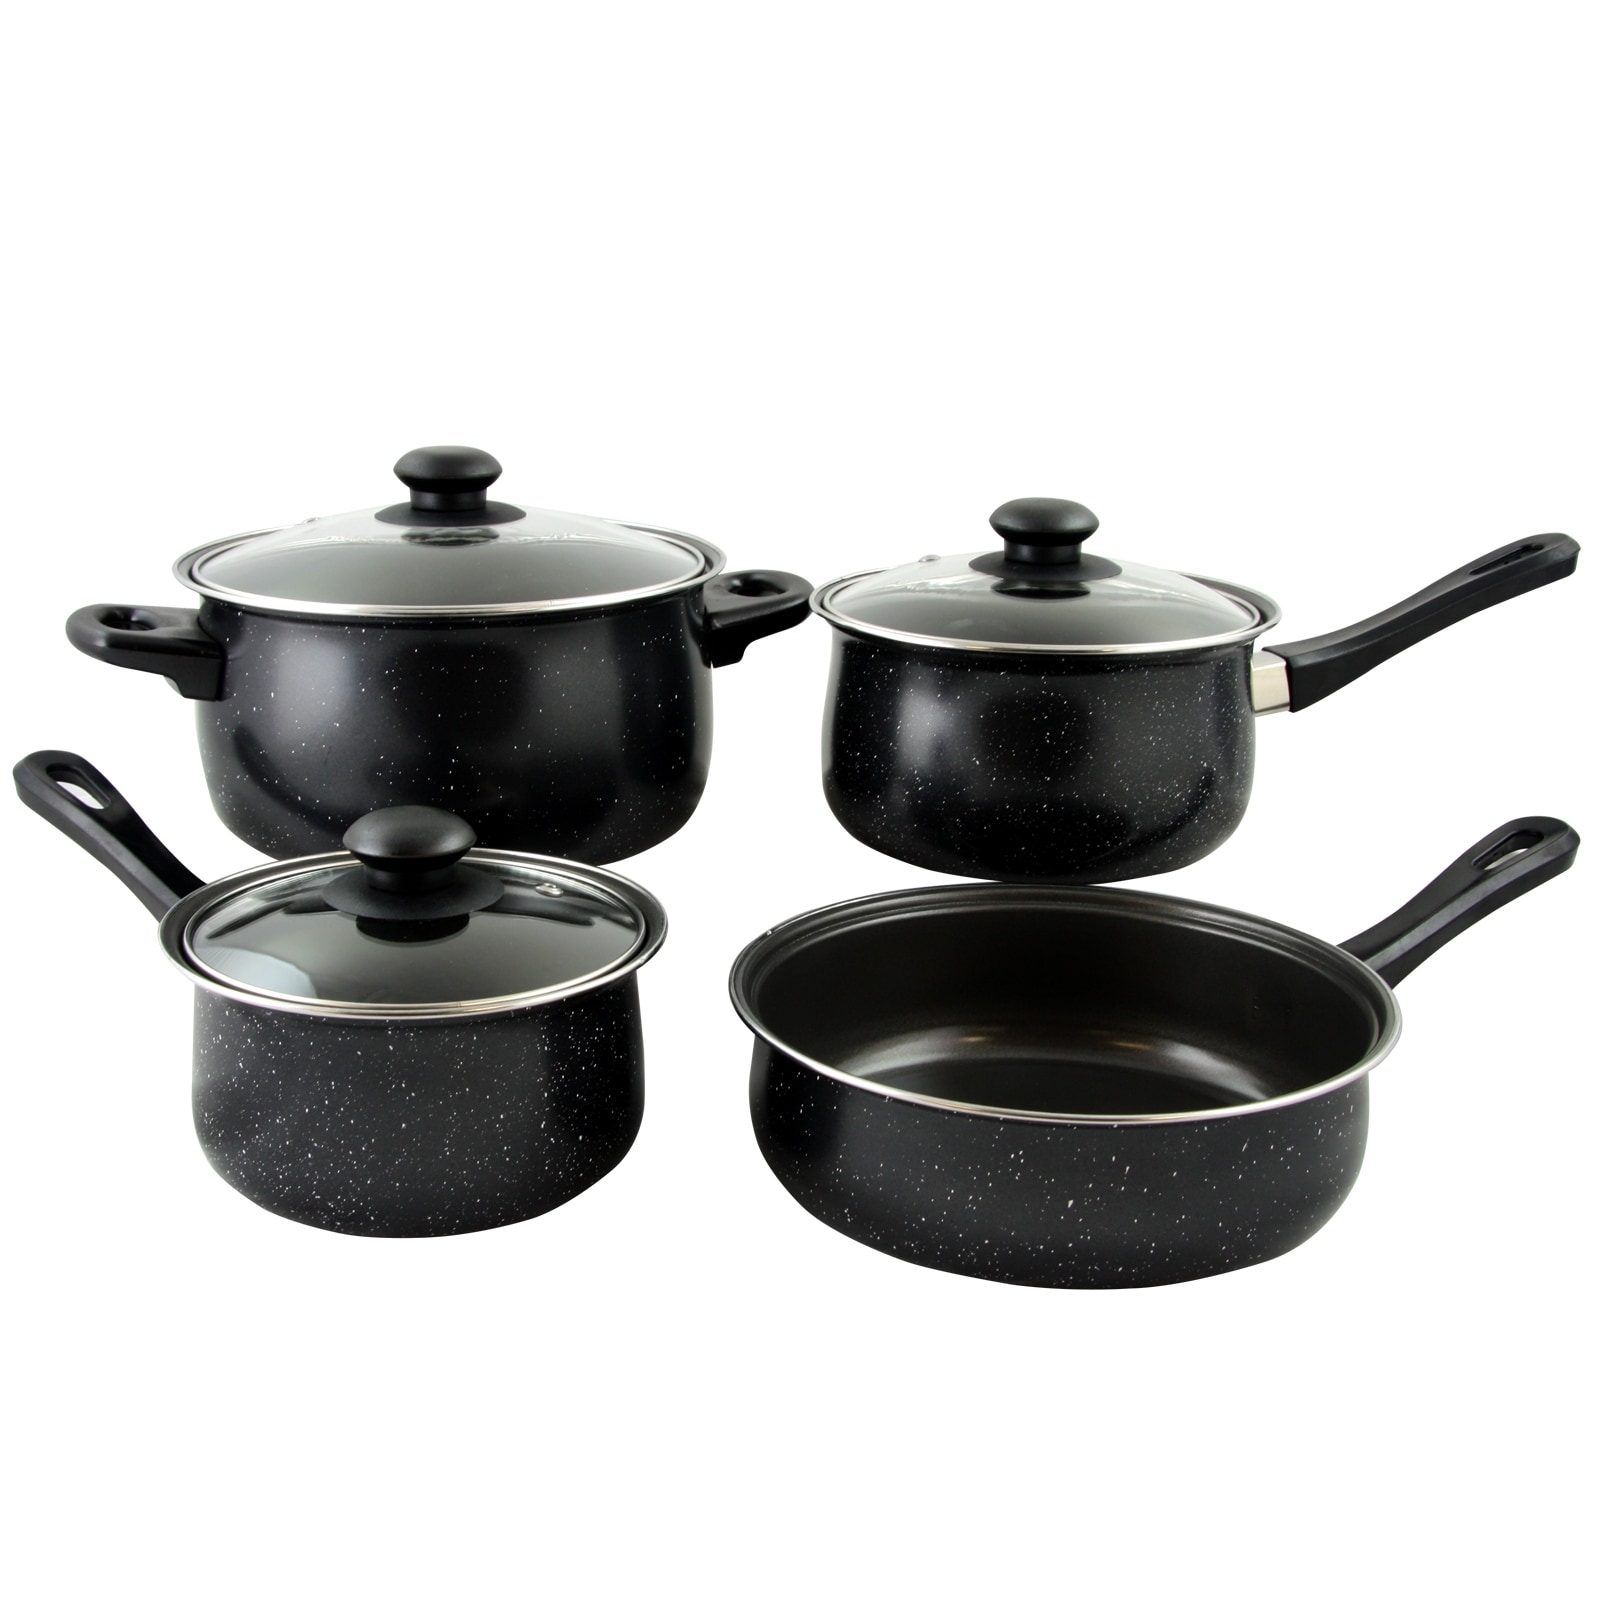 https://ak1.ostkcdn.com/images/products/is/images/direct/9f068cbb0593cae238e028b533292cf350cc7918/Gibson-Home-Casselman-7-piece-Cookware-Set-in-Black-with-Bakelite-Handle.jpg